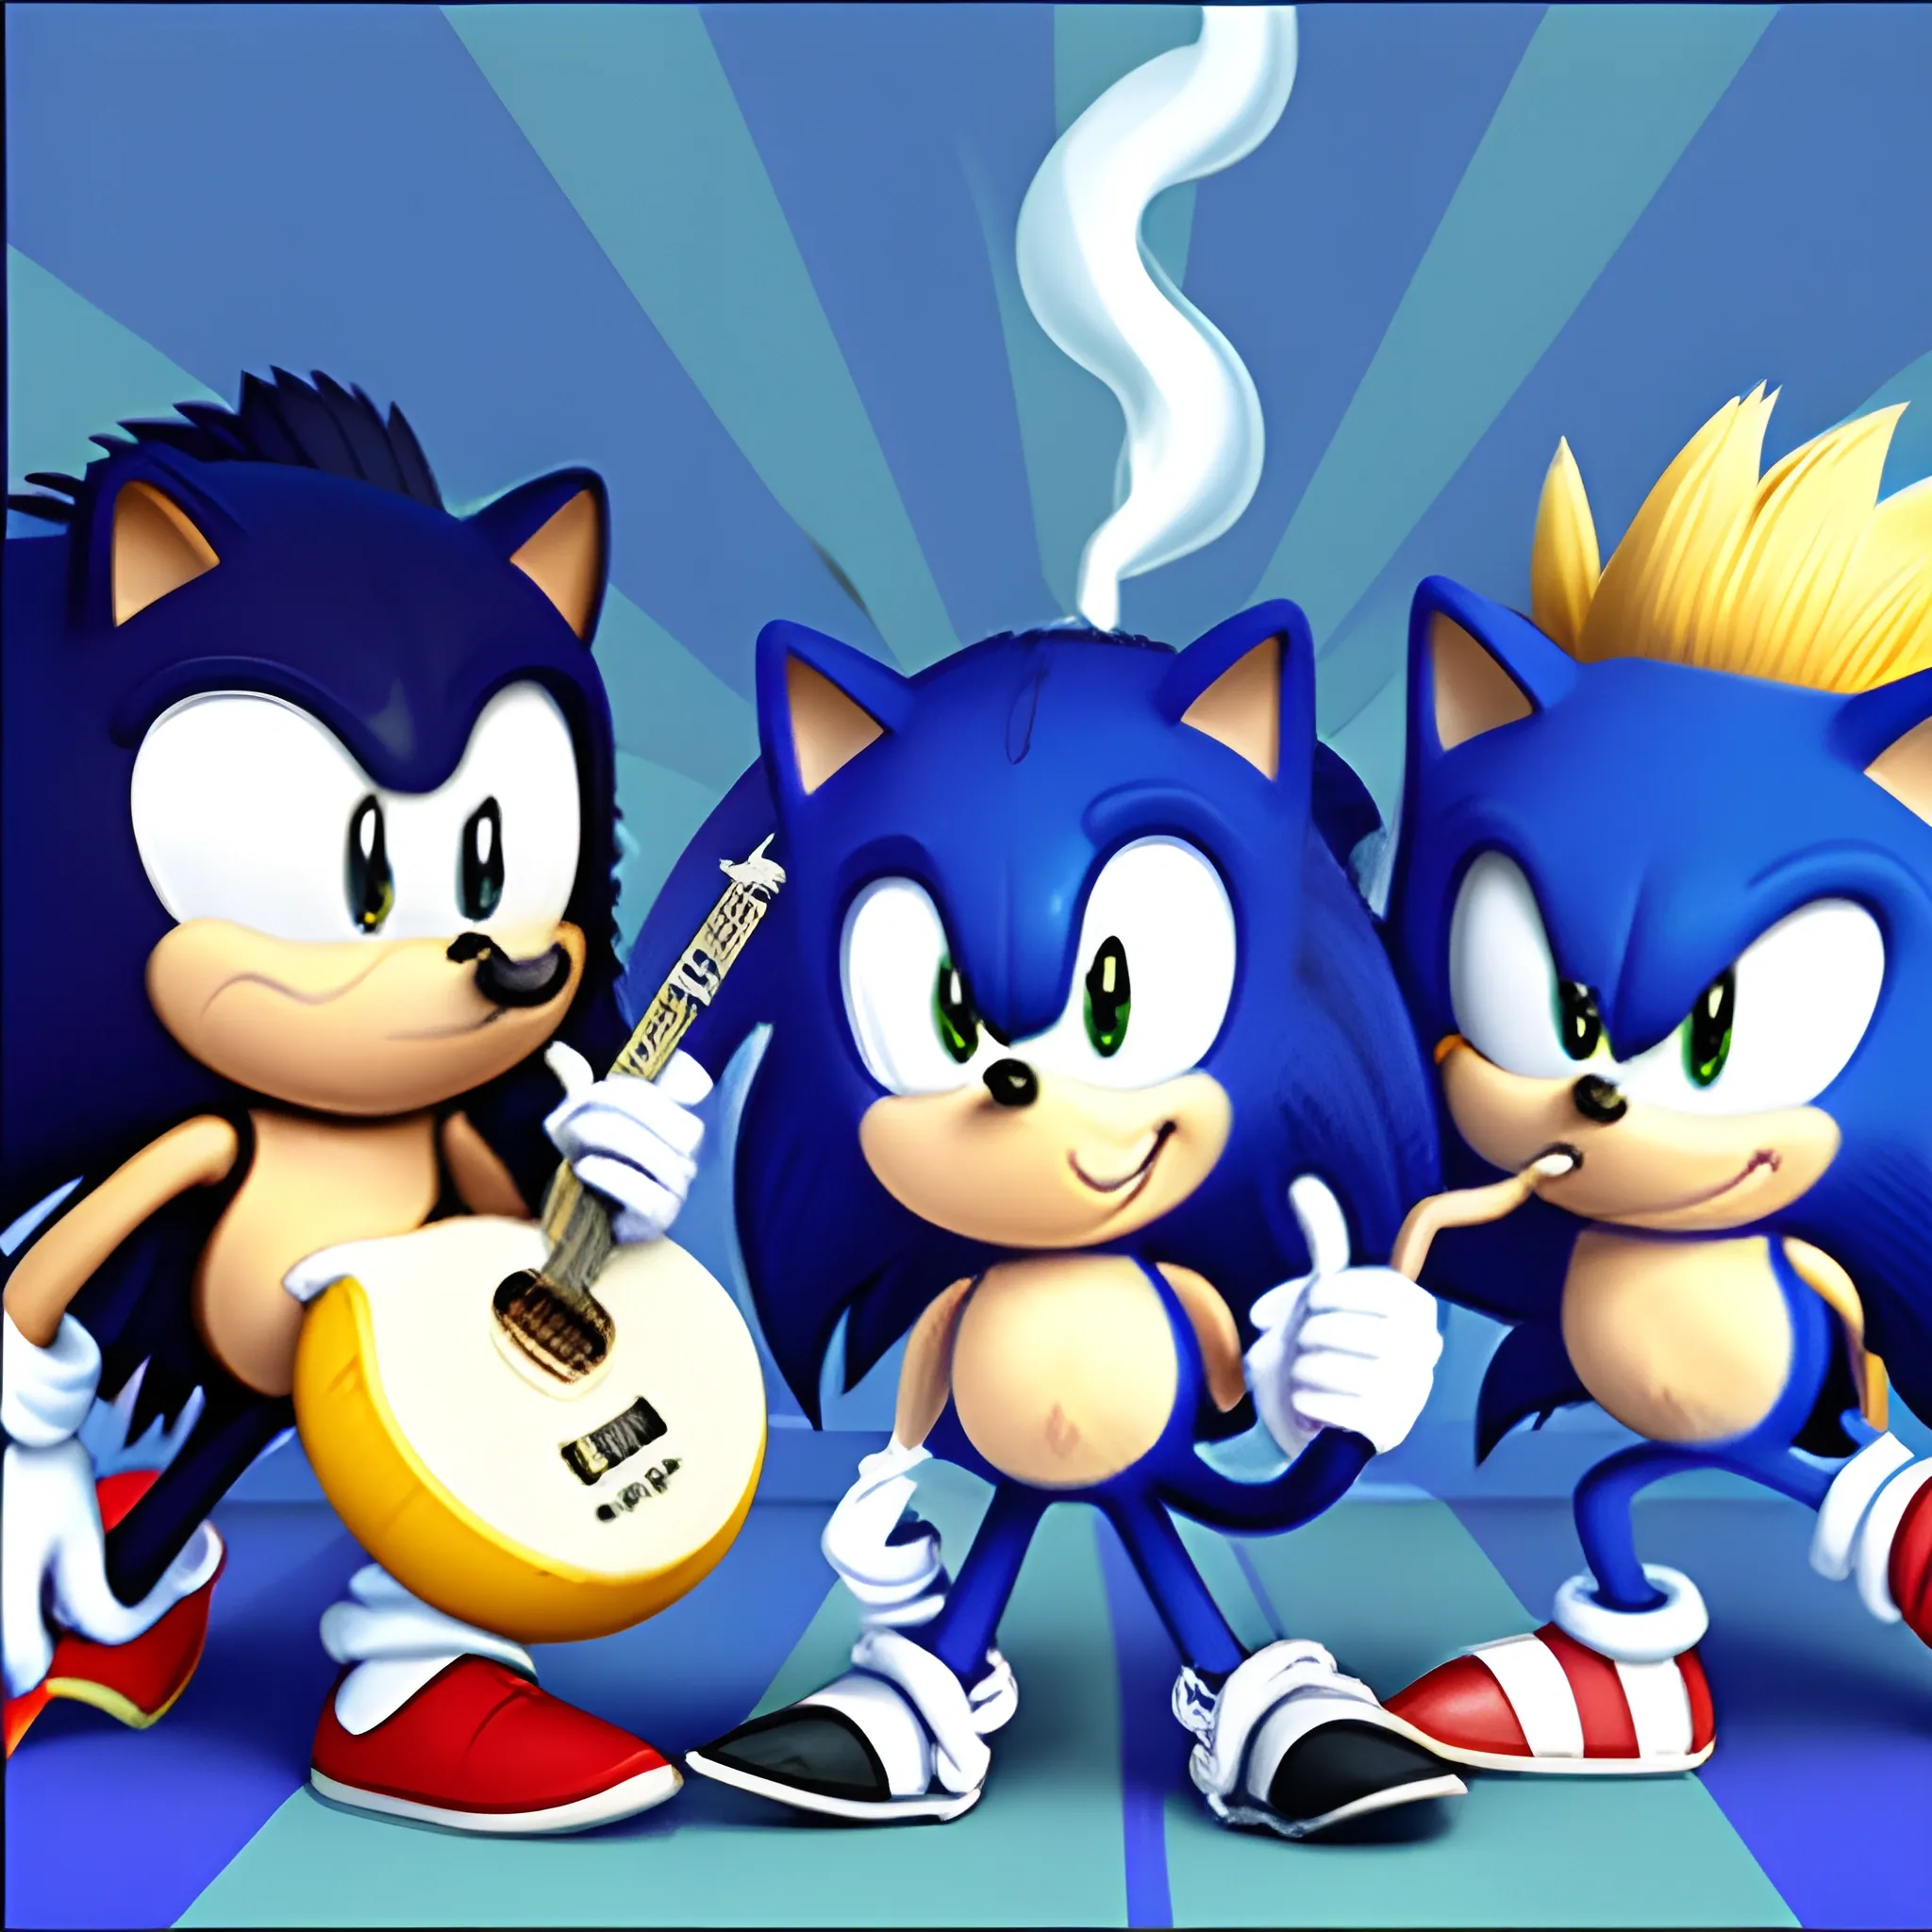 The Beatles & Sonic the hedgehog, smoking a joint